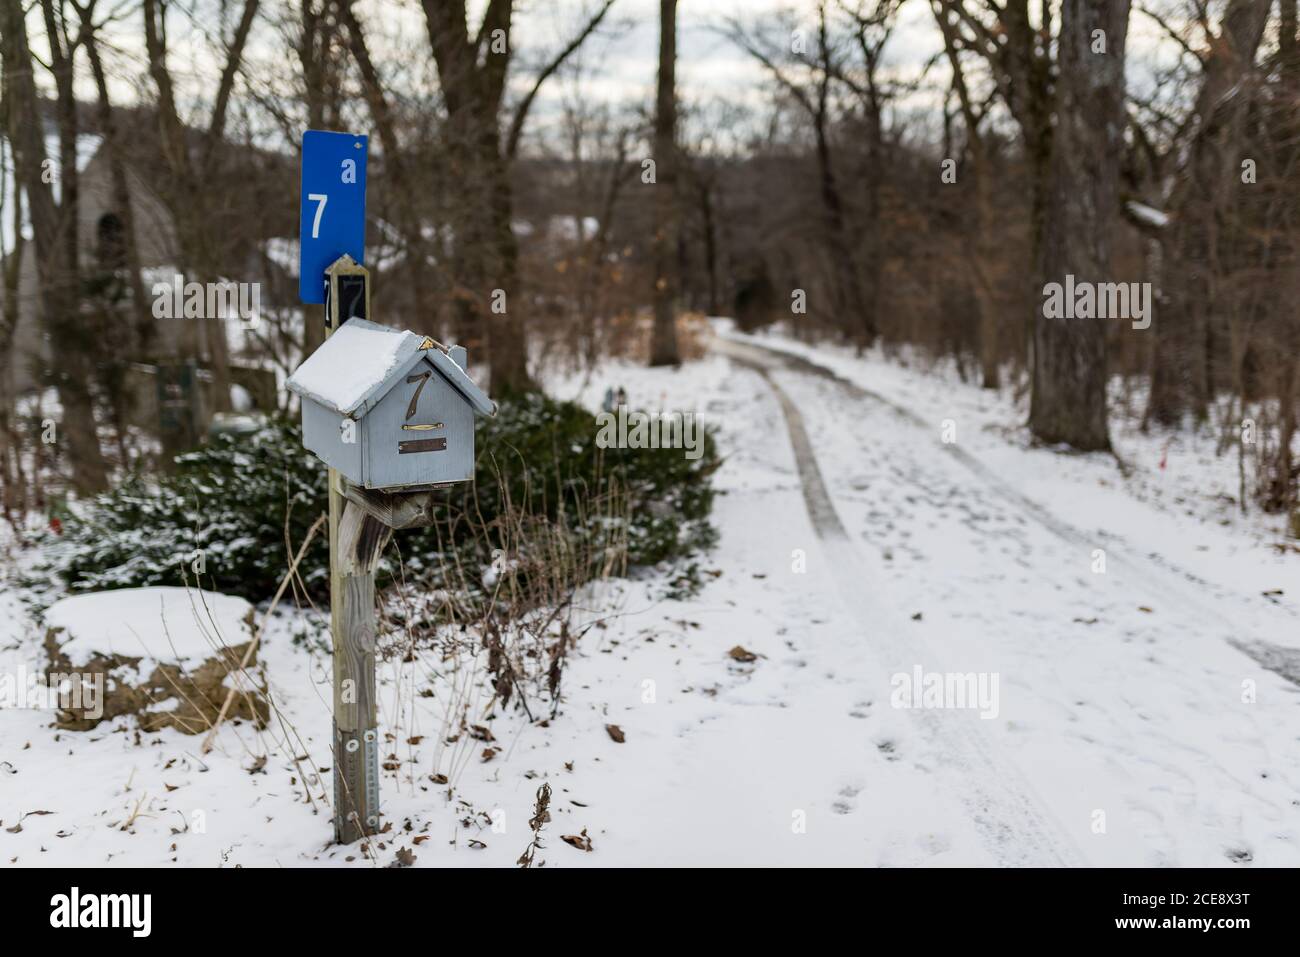 A house shaped wooden mailbox covered with snow, winter scene Stock Photo